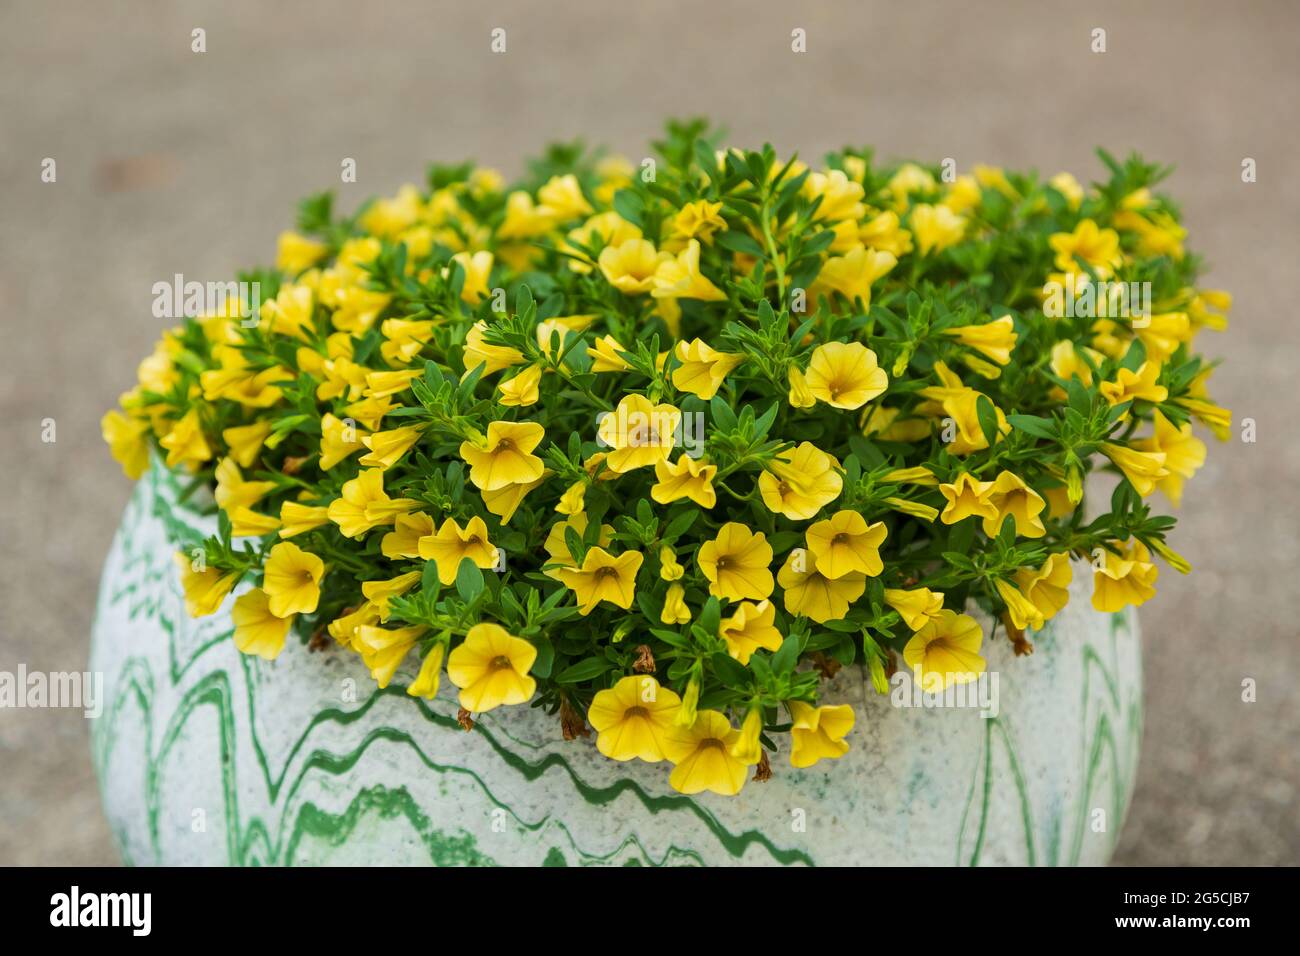 a low angle view of a flower pot full of yellow million bells flowers Stock Photo